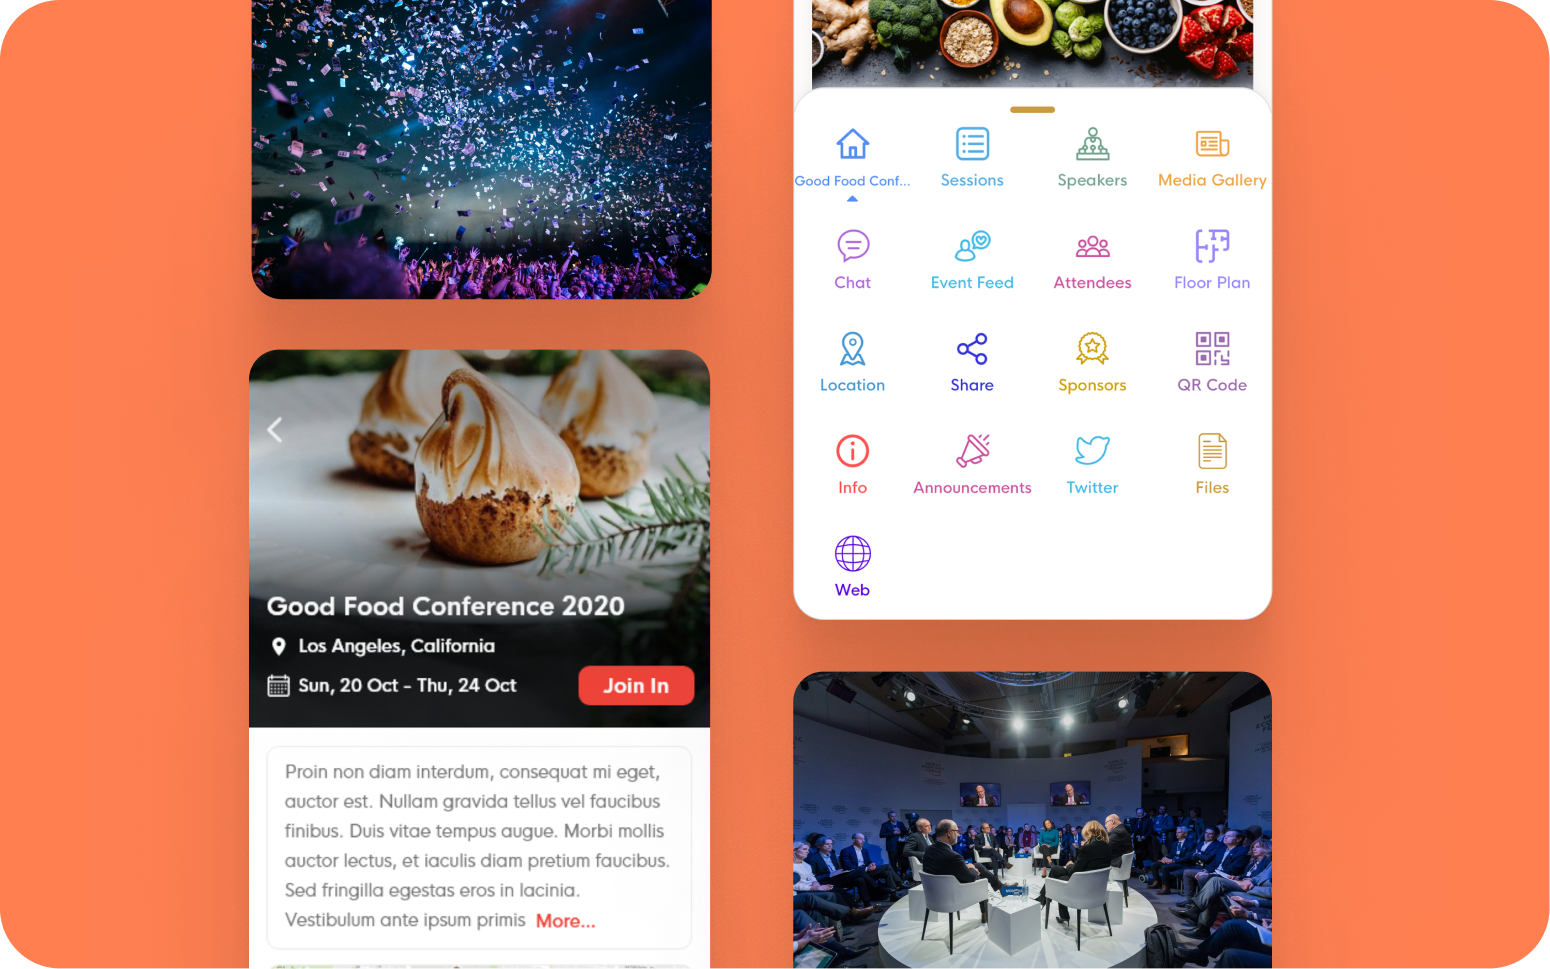 Mobile app for events, membership clubs, and communities